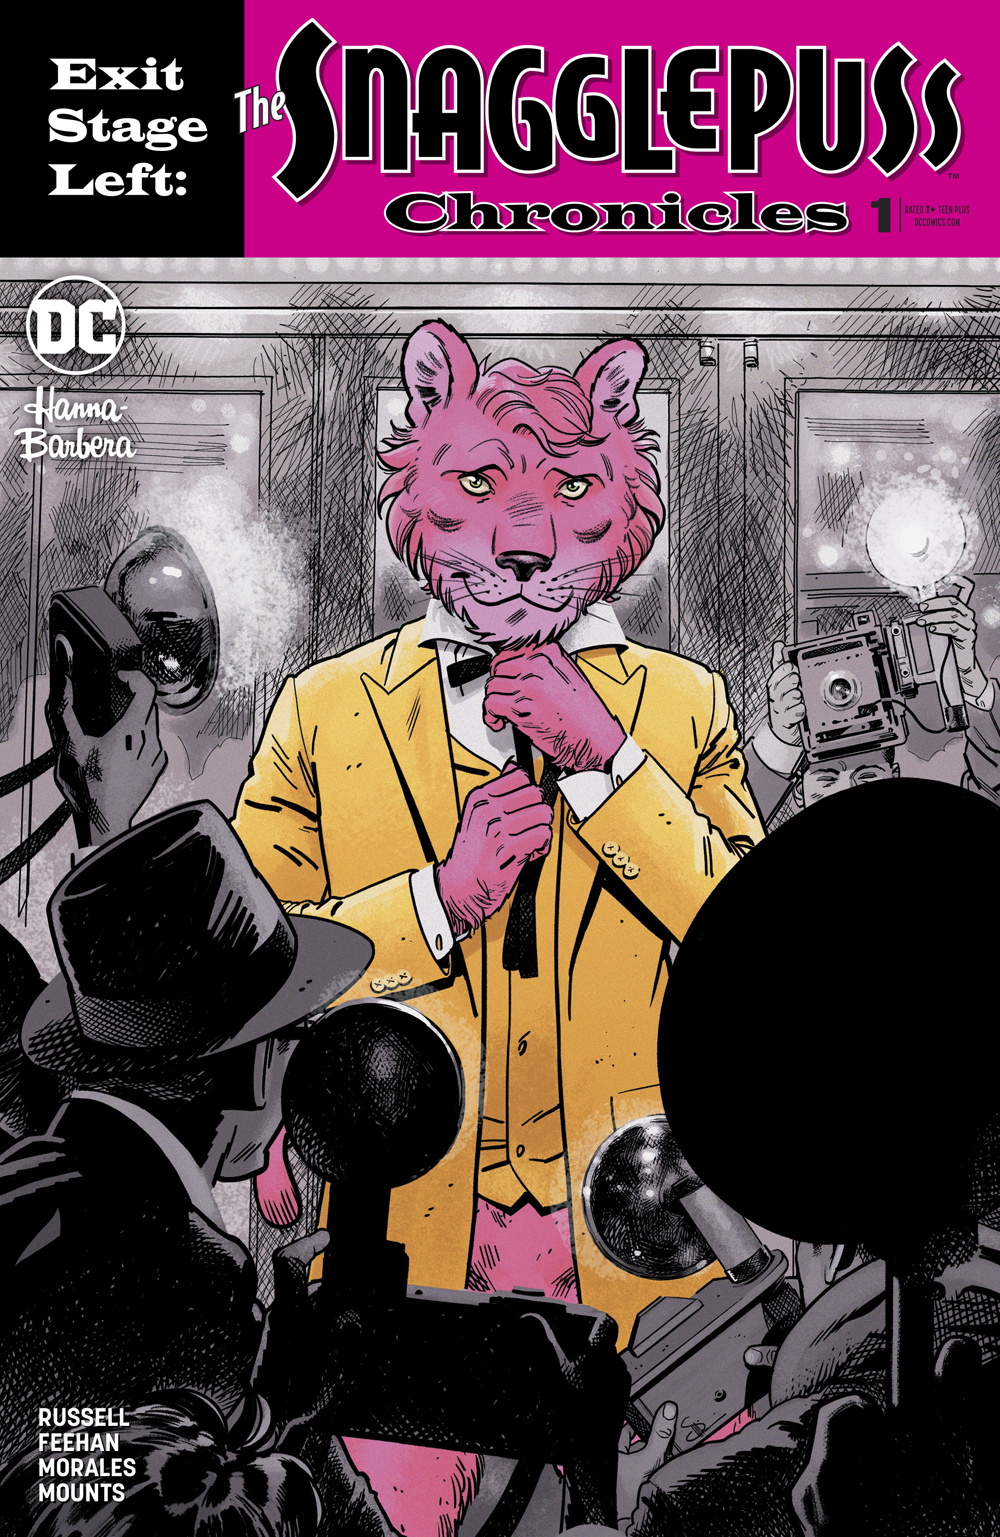 EXIT STAGE LEFT THE SNAGGLEPUSS CHRONICLES #1 (OF 6) VAR ED